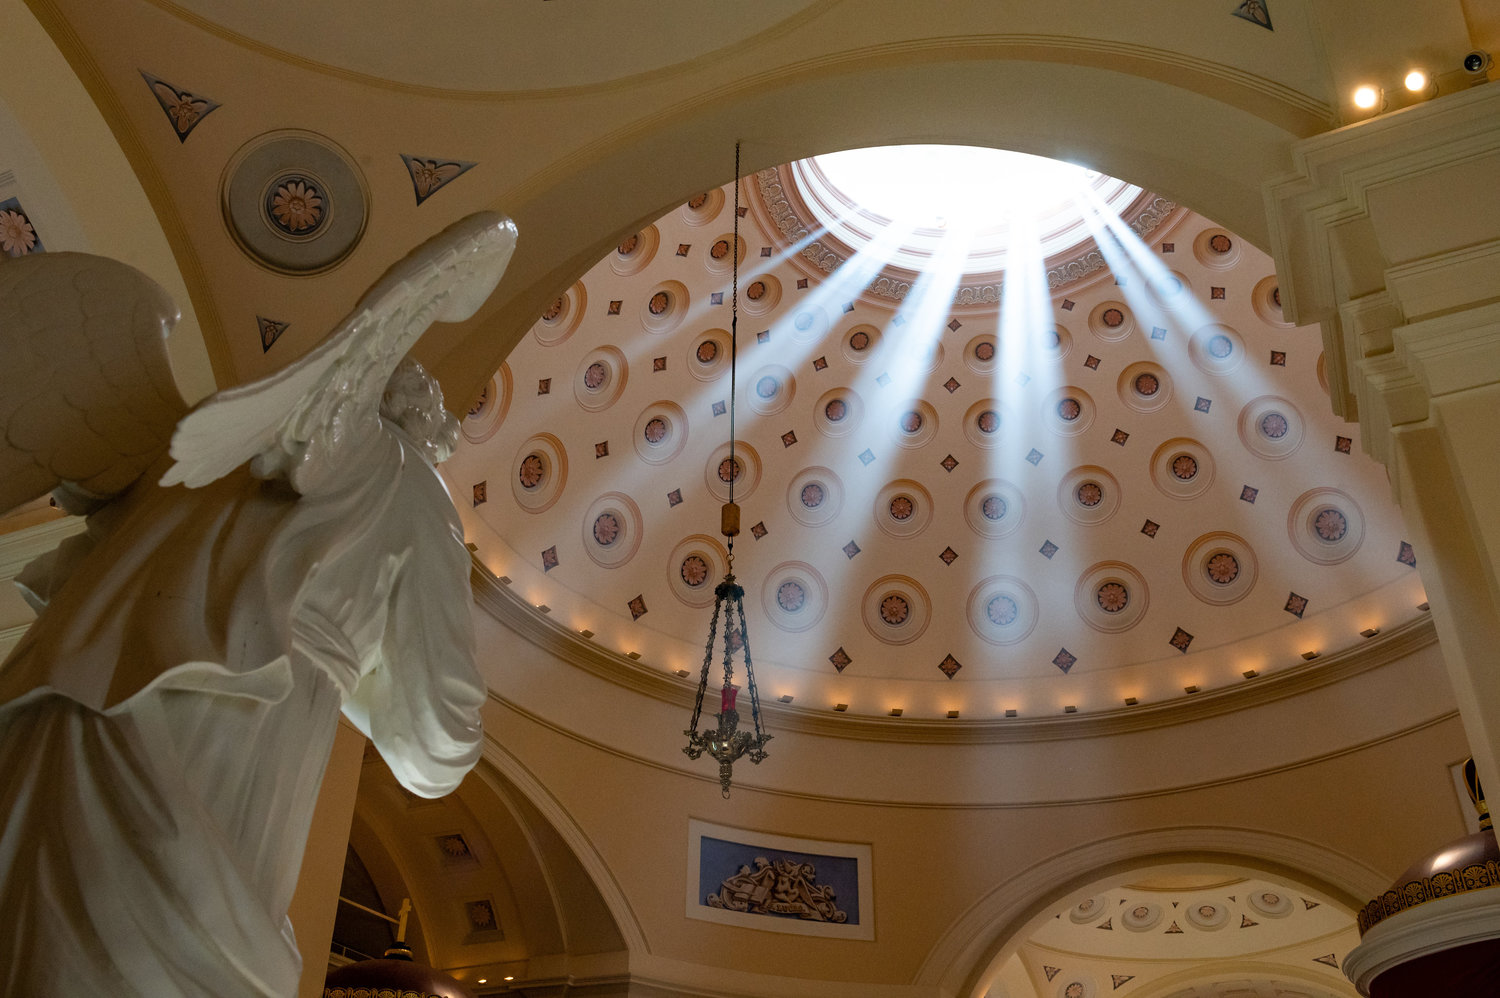 SHINING MOMENT—The afternoon sun shines through the dome of the Basilica of the National Shrine of the Assumption of the Blessed Virgin Mary in Baltimore May 31 shortly after the conclusion of a Mass celebrating the 200th anniversary of the basilica’s dedication.